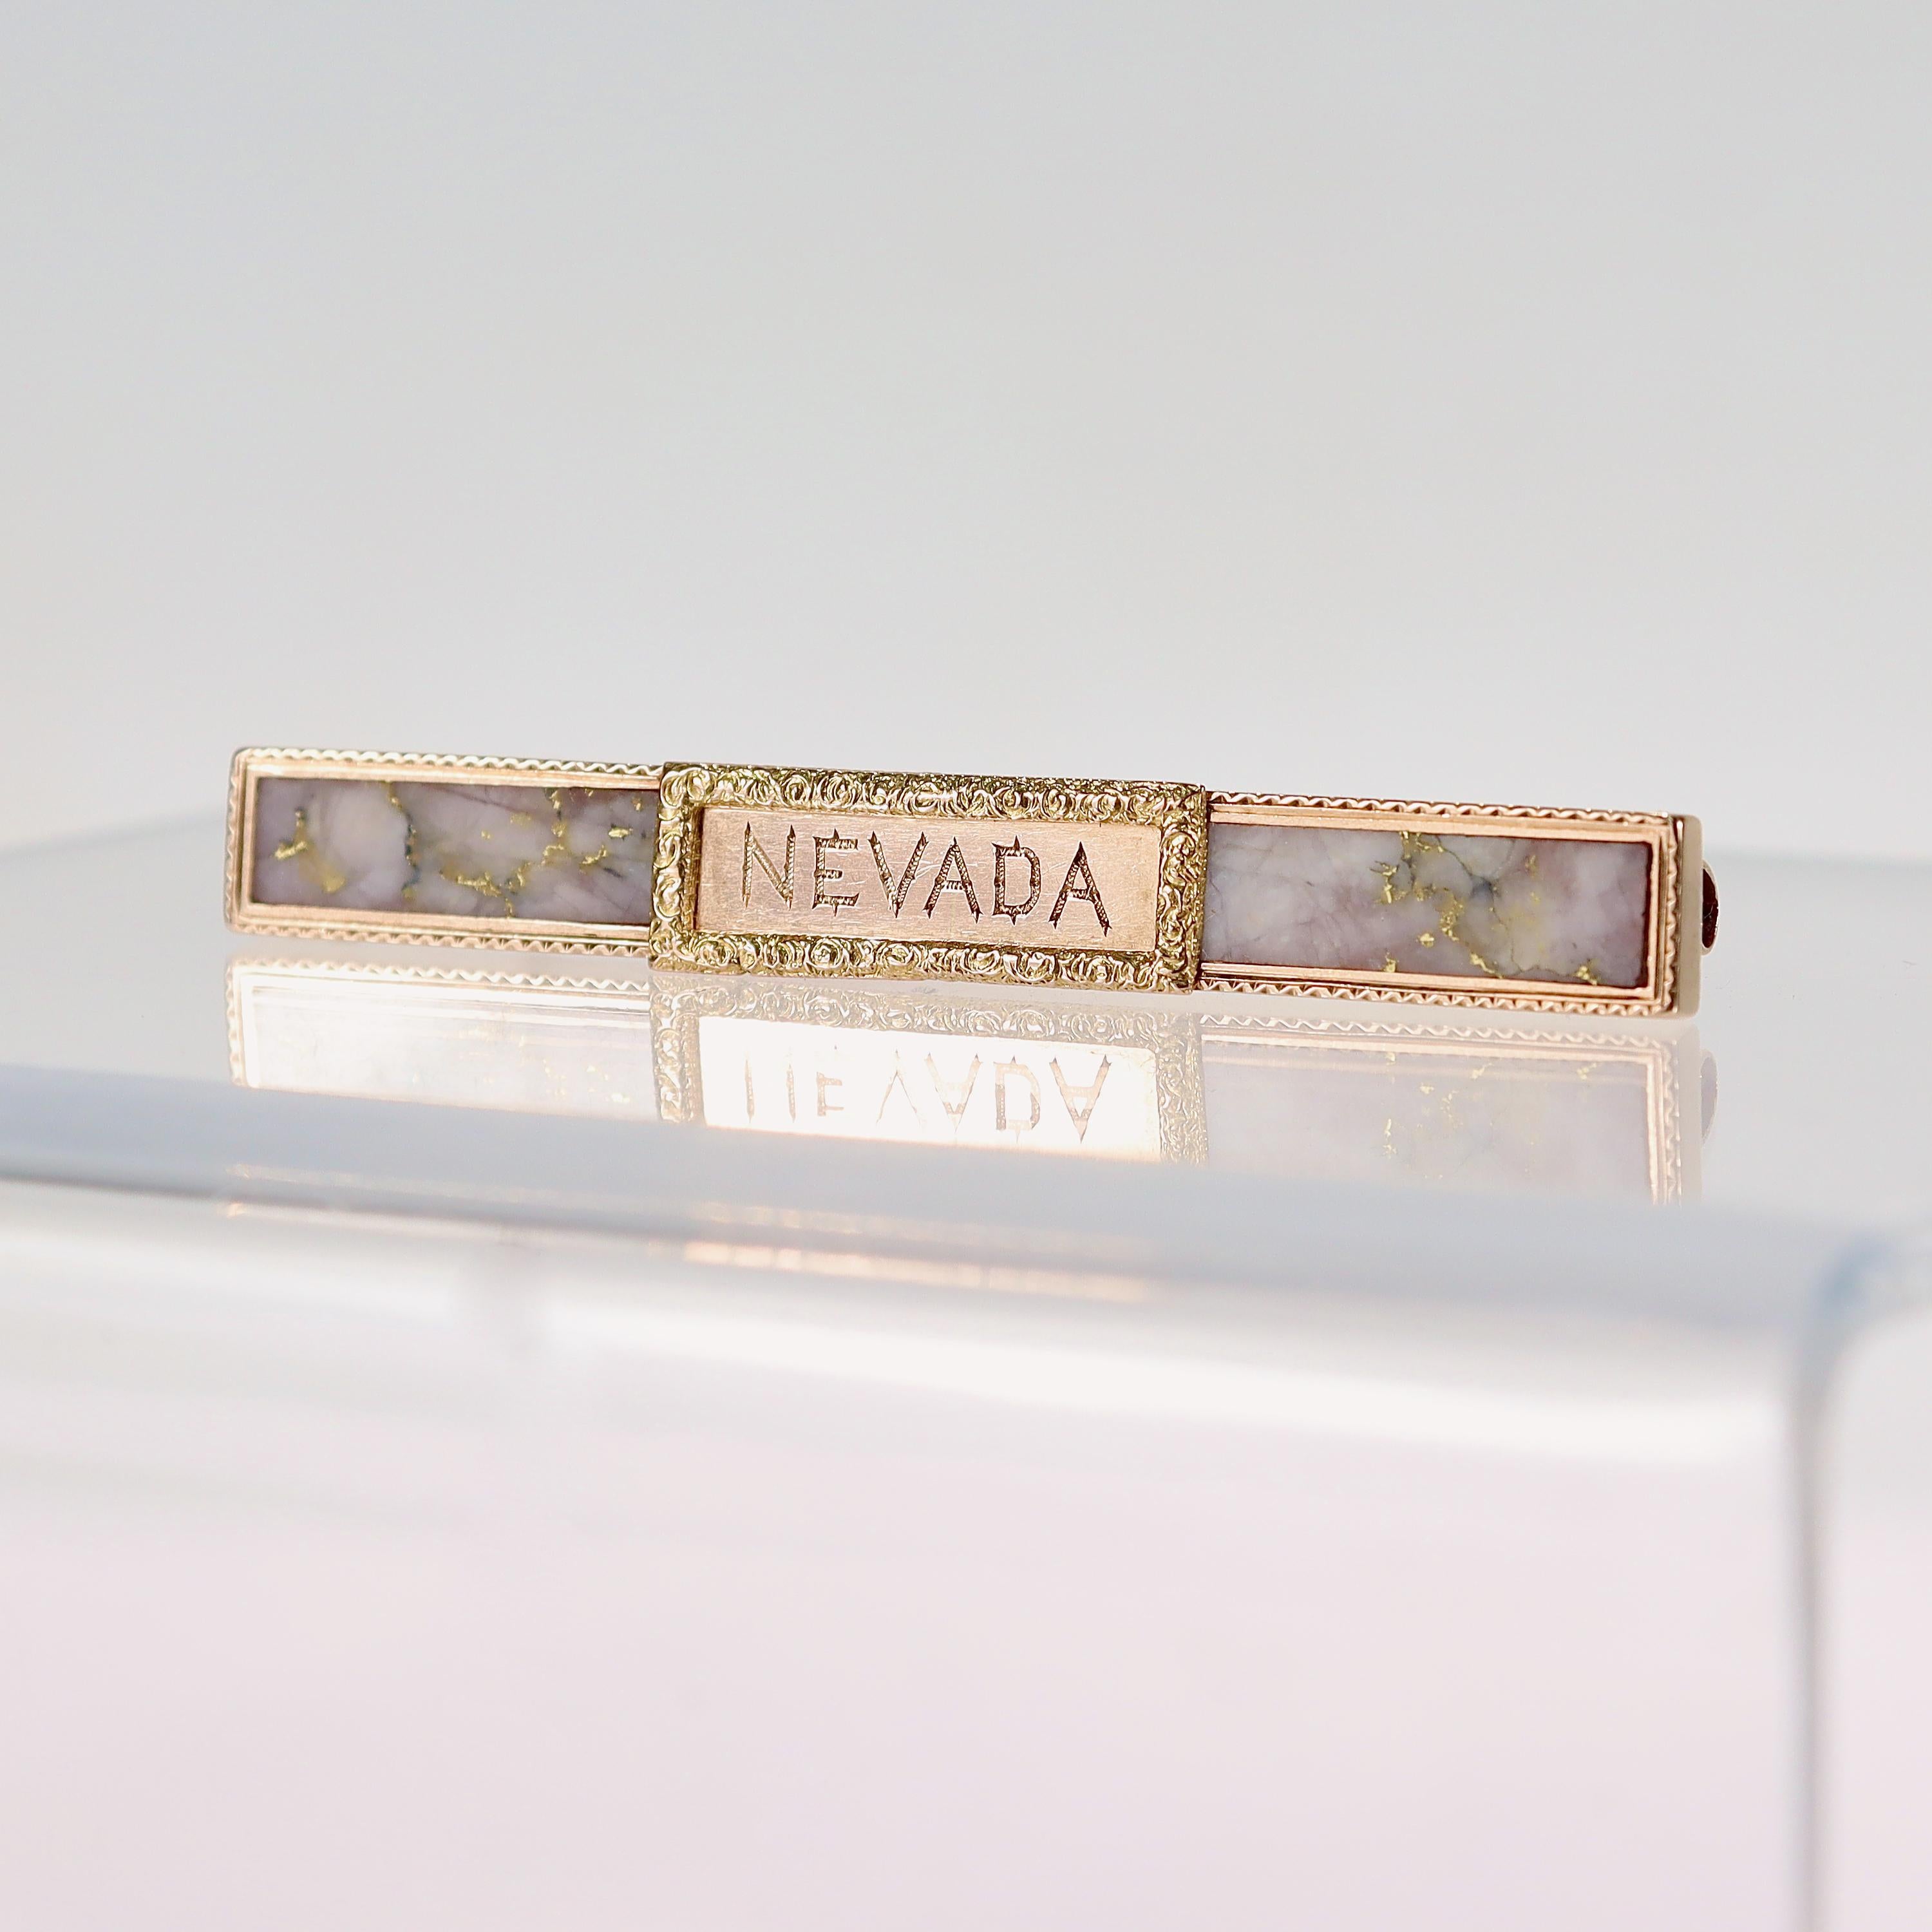 A very fine Gold Rush pin.

Set in 14 karat yellow gold. 

With a bezel set a rectangle bar of gold quartz mounted with an engraved plaque to the center identifying Nevada.

Simply a great piece of wearable American History! 

Date:
Early 20th